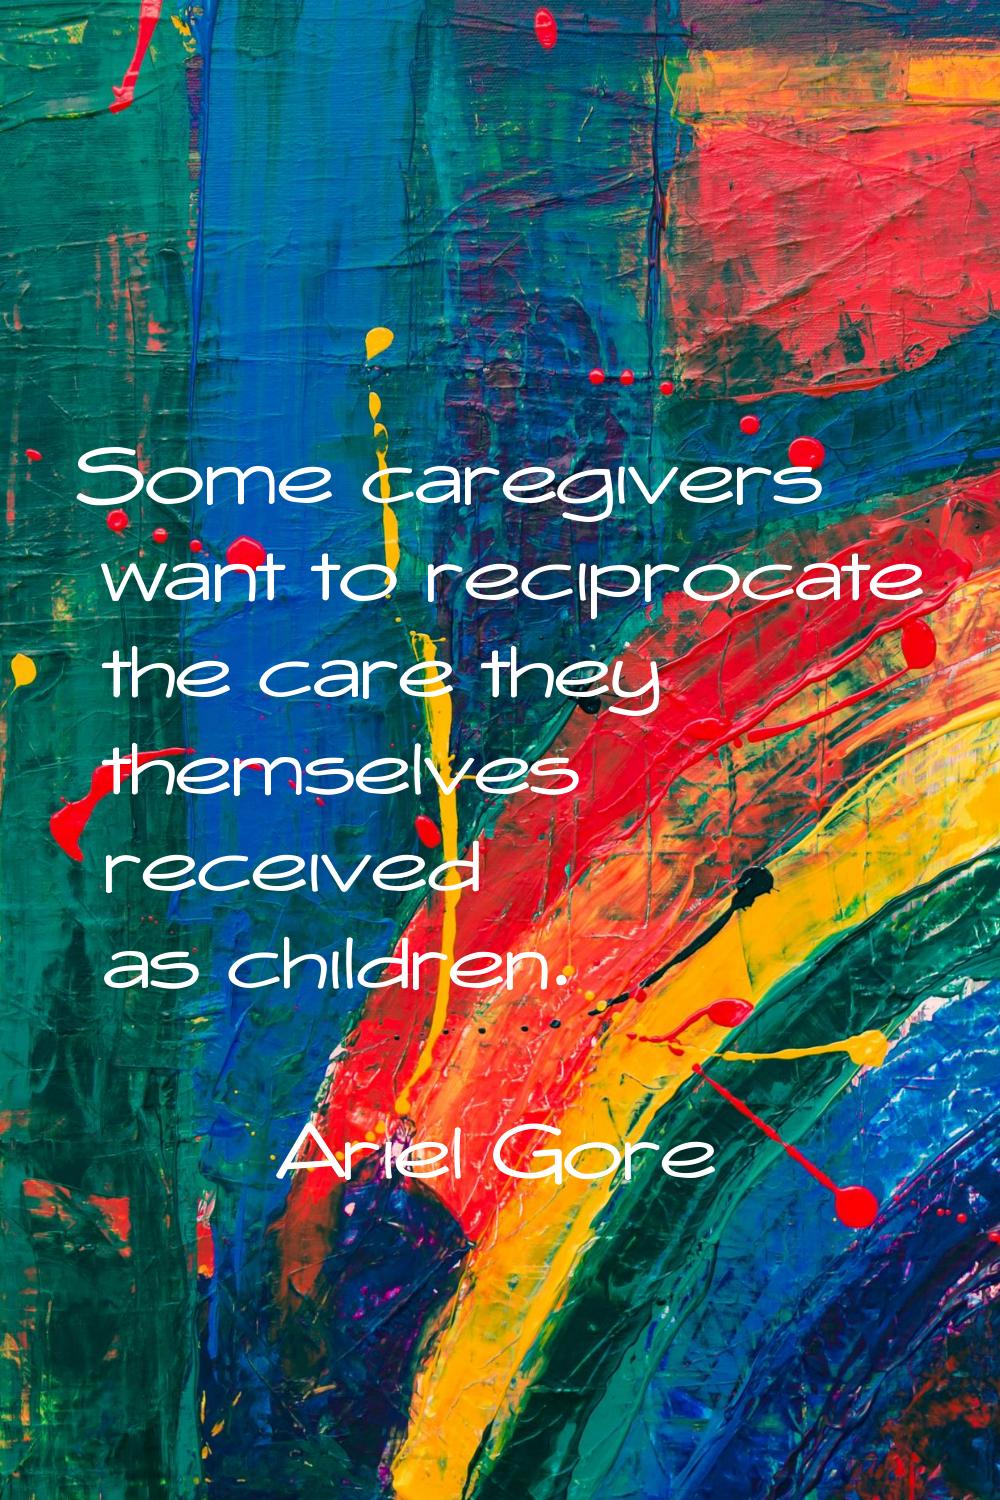 Some caregivers want to reciprocate the care they themselves received as children.